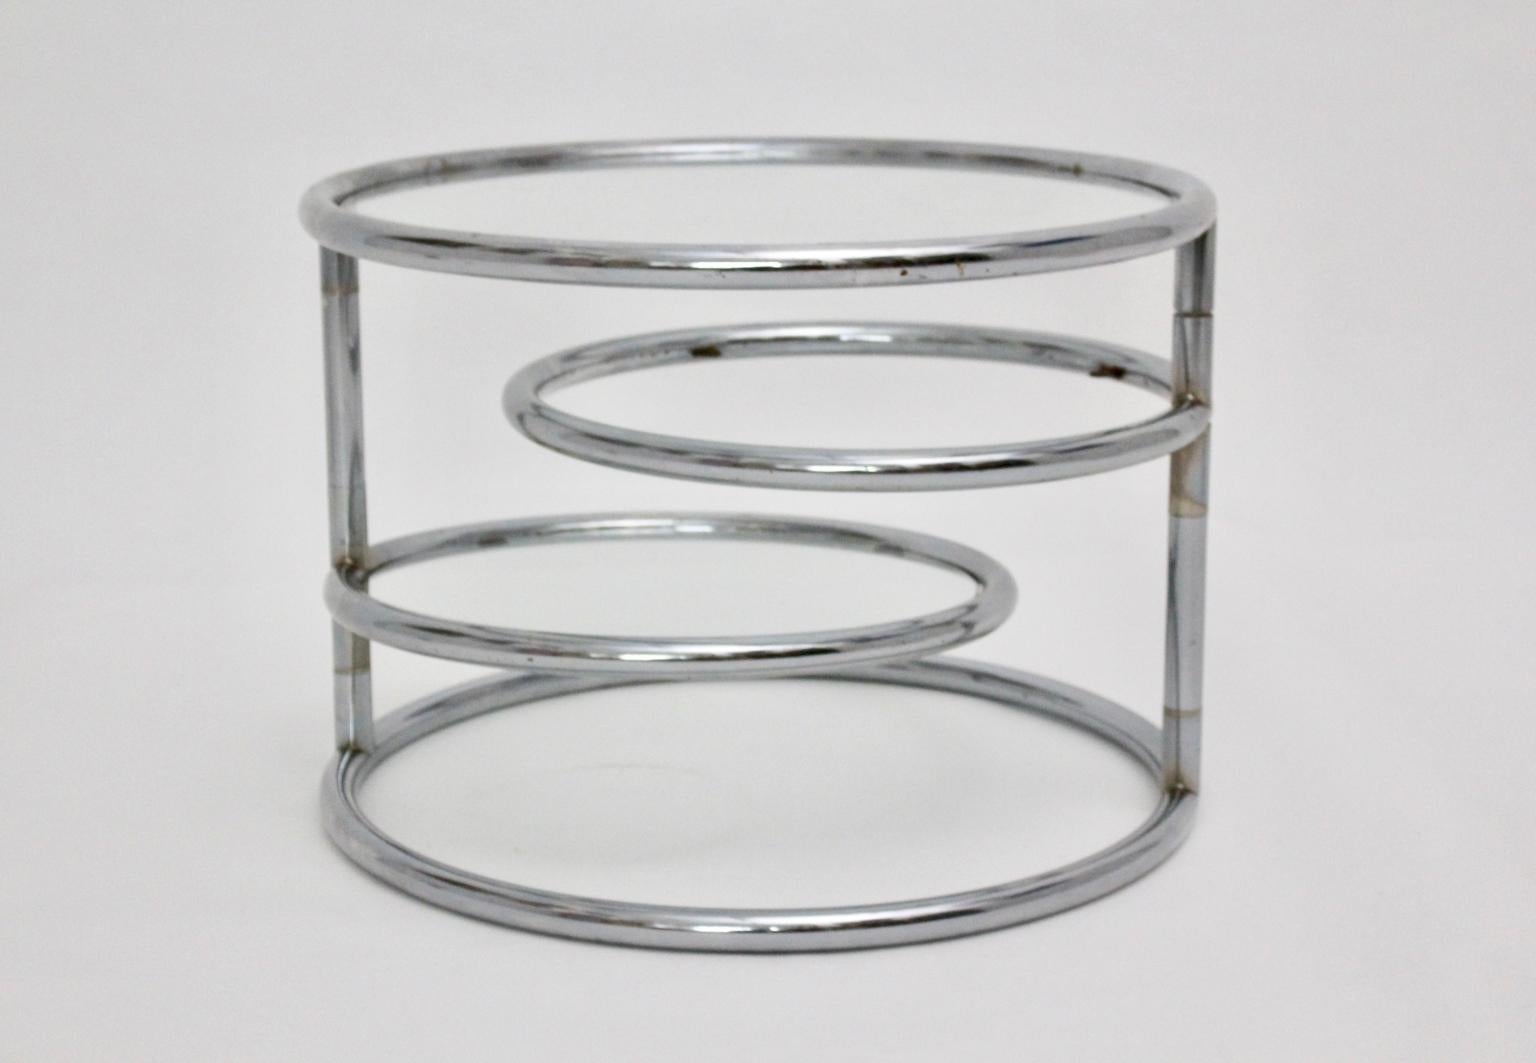 This presented coffee table from circa 1970 shows a chromed metal tube steel frame with a clear glass top and two revolving clear glass plates.
Very good vintage condition with signs of age and use.
The glass plate shows fine